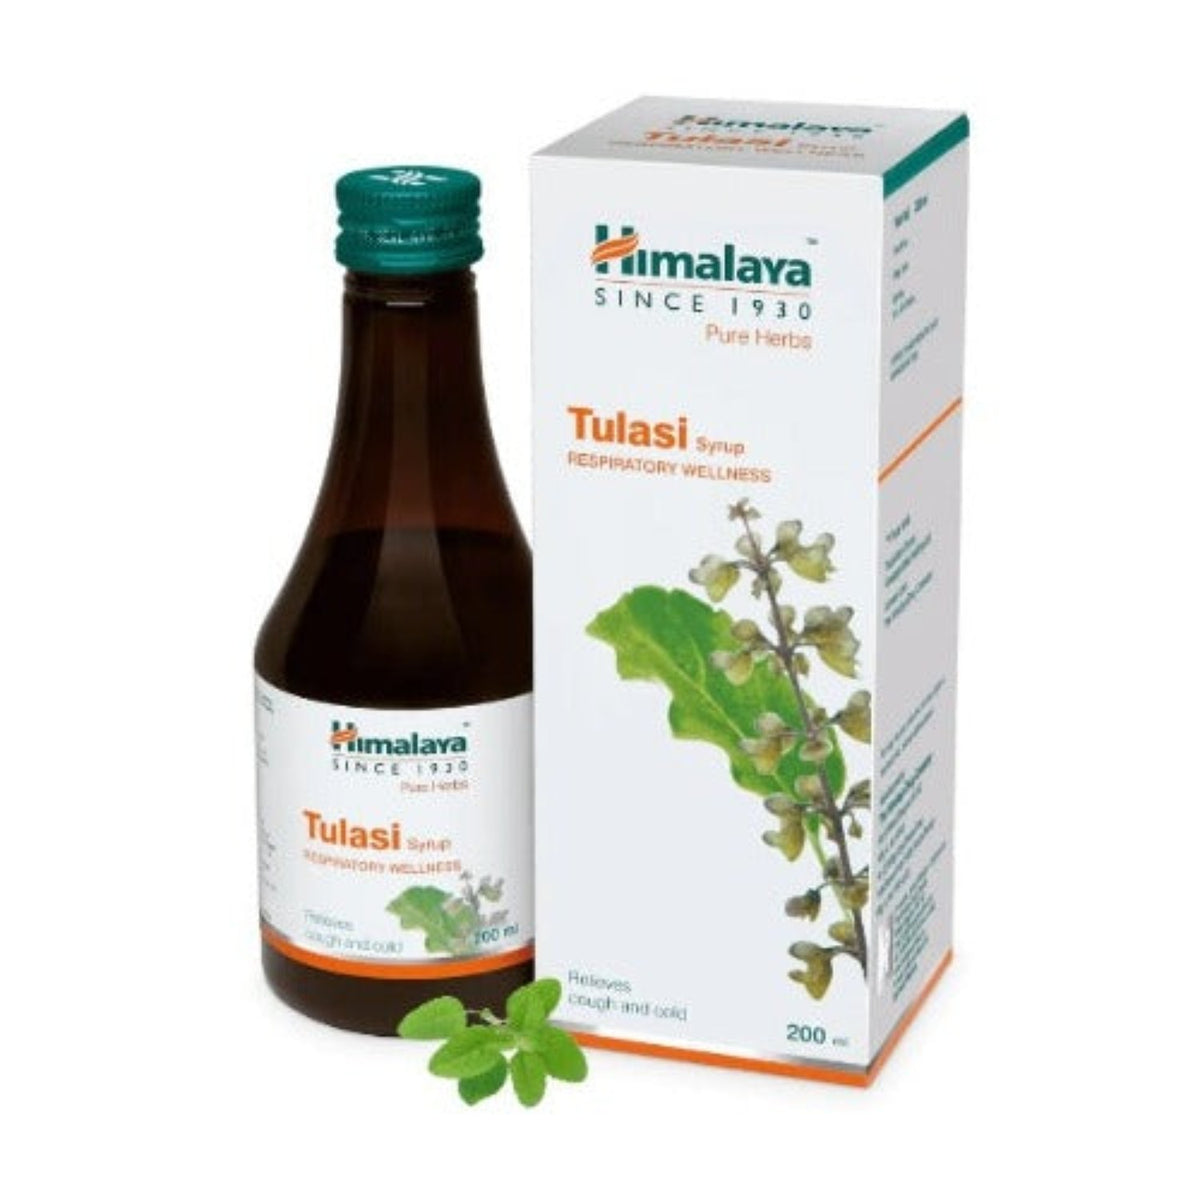 Himalaya Pure Herbs Respiratory Wellness Herbal Ayurvedic Tulasi Relieves Cough And Cold Syrup 200 ml